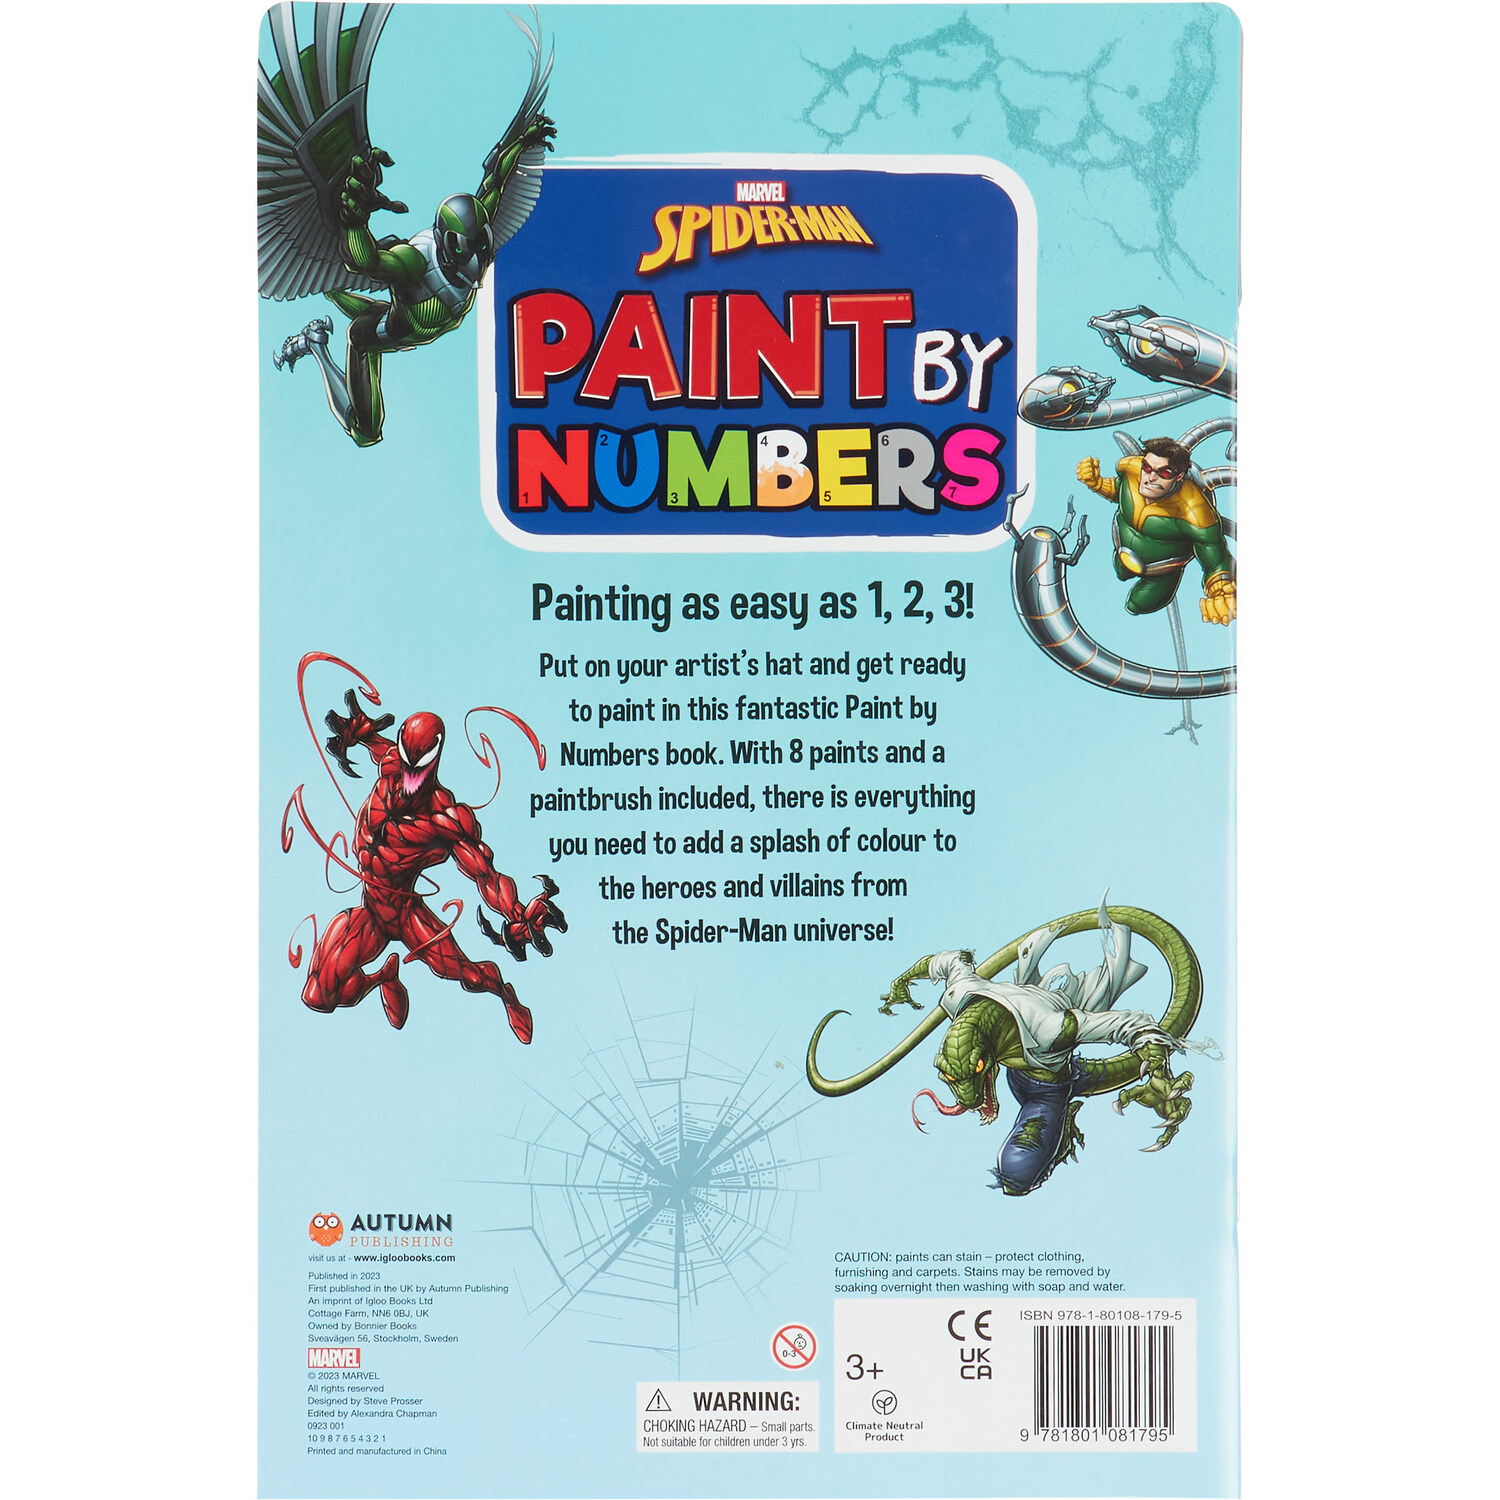 Paint by Numbers Book Image 8